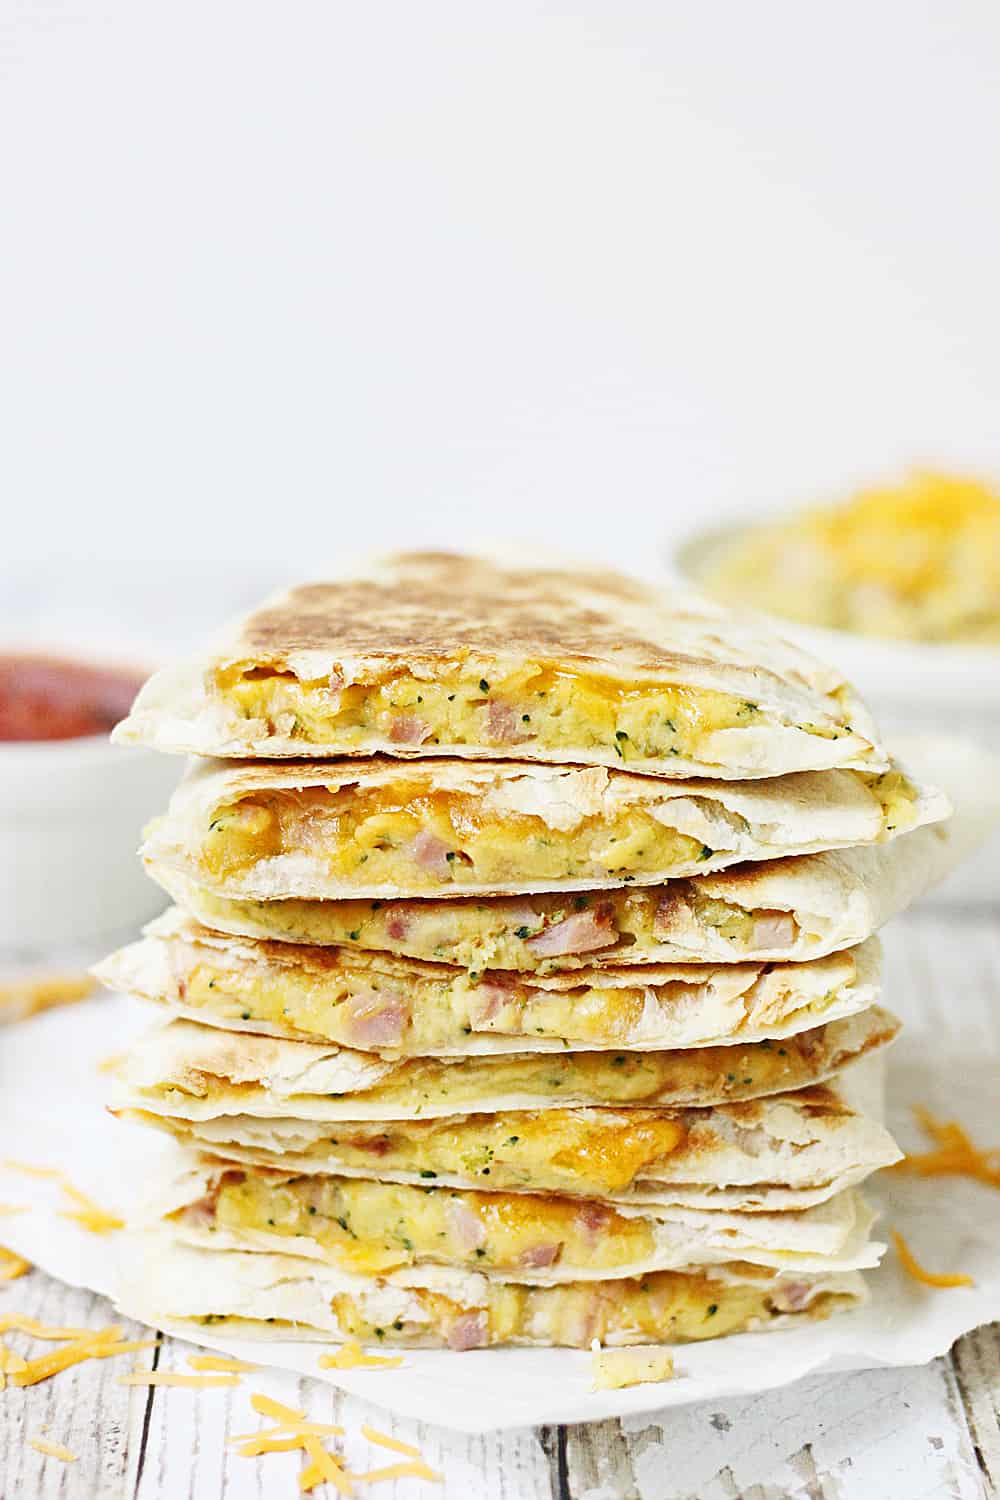 5-Minute Broccoli Ham & Cheese Quesadilla -- A quick and easy way to prepare a midweek meal and get your family to eat extra veggies.